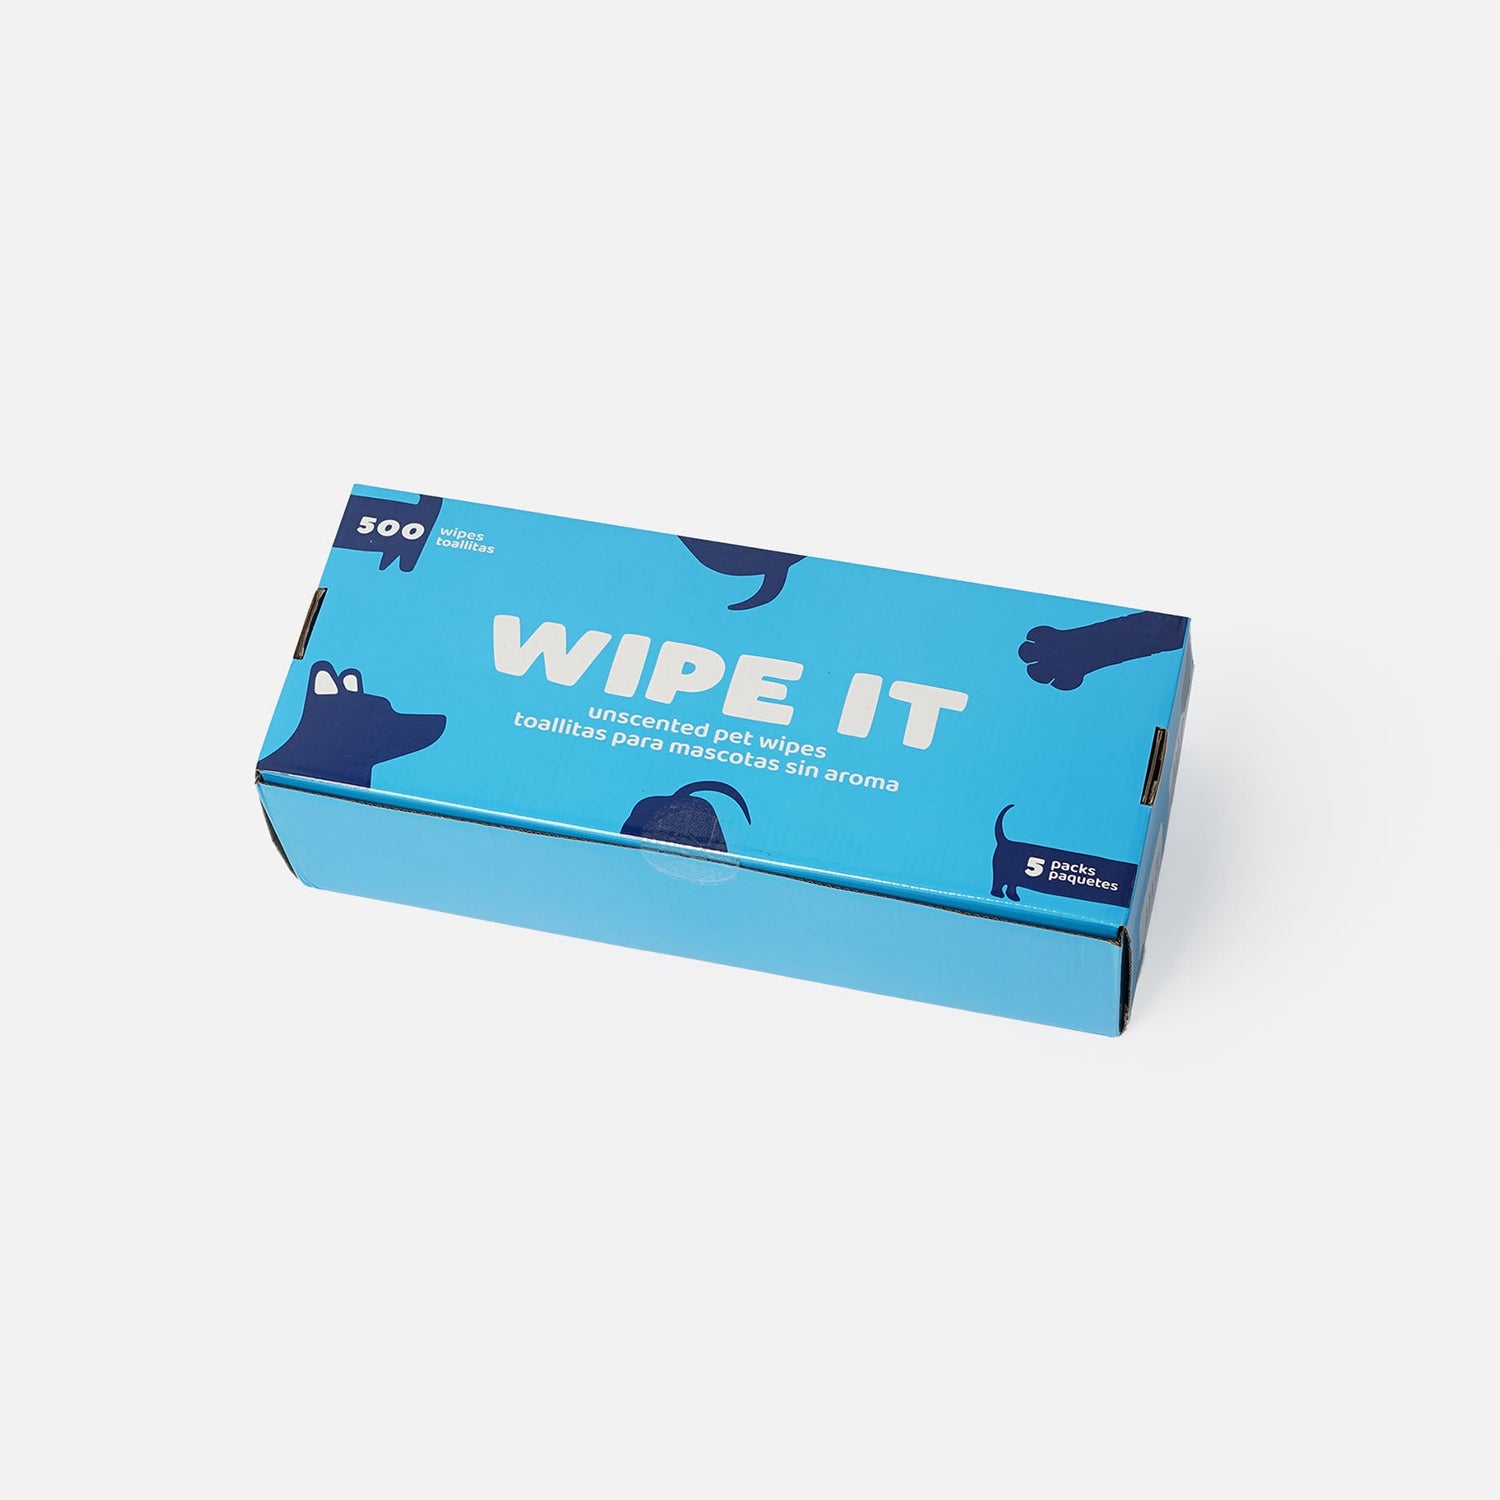 Wipe It 5 Pack Wipes (500 Wipes) - Silver Paw